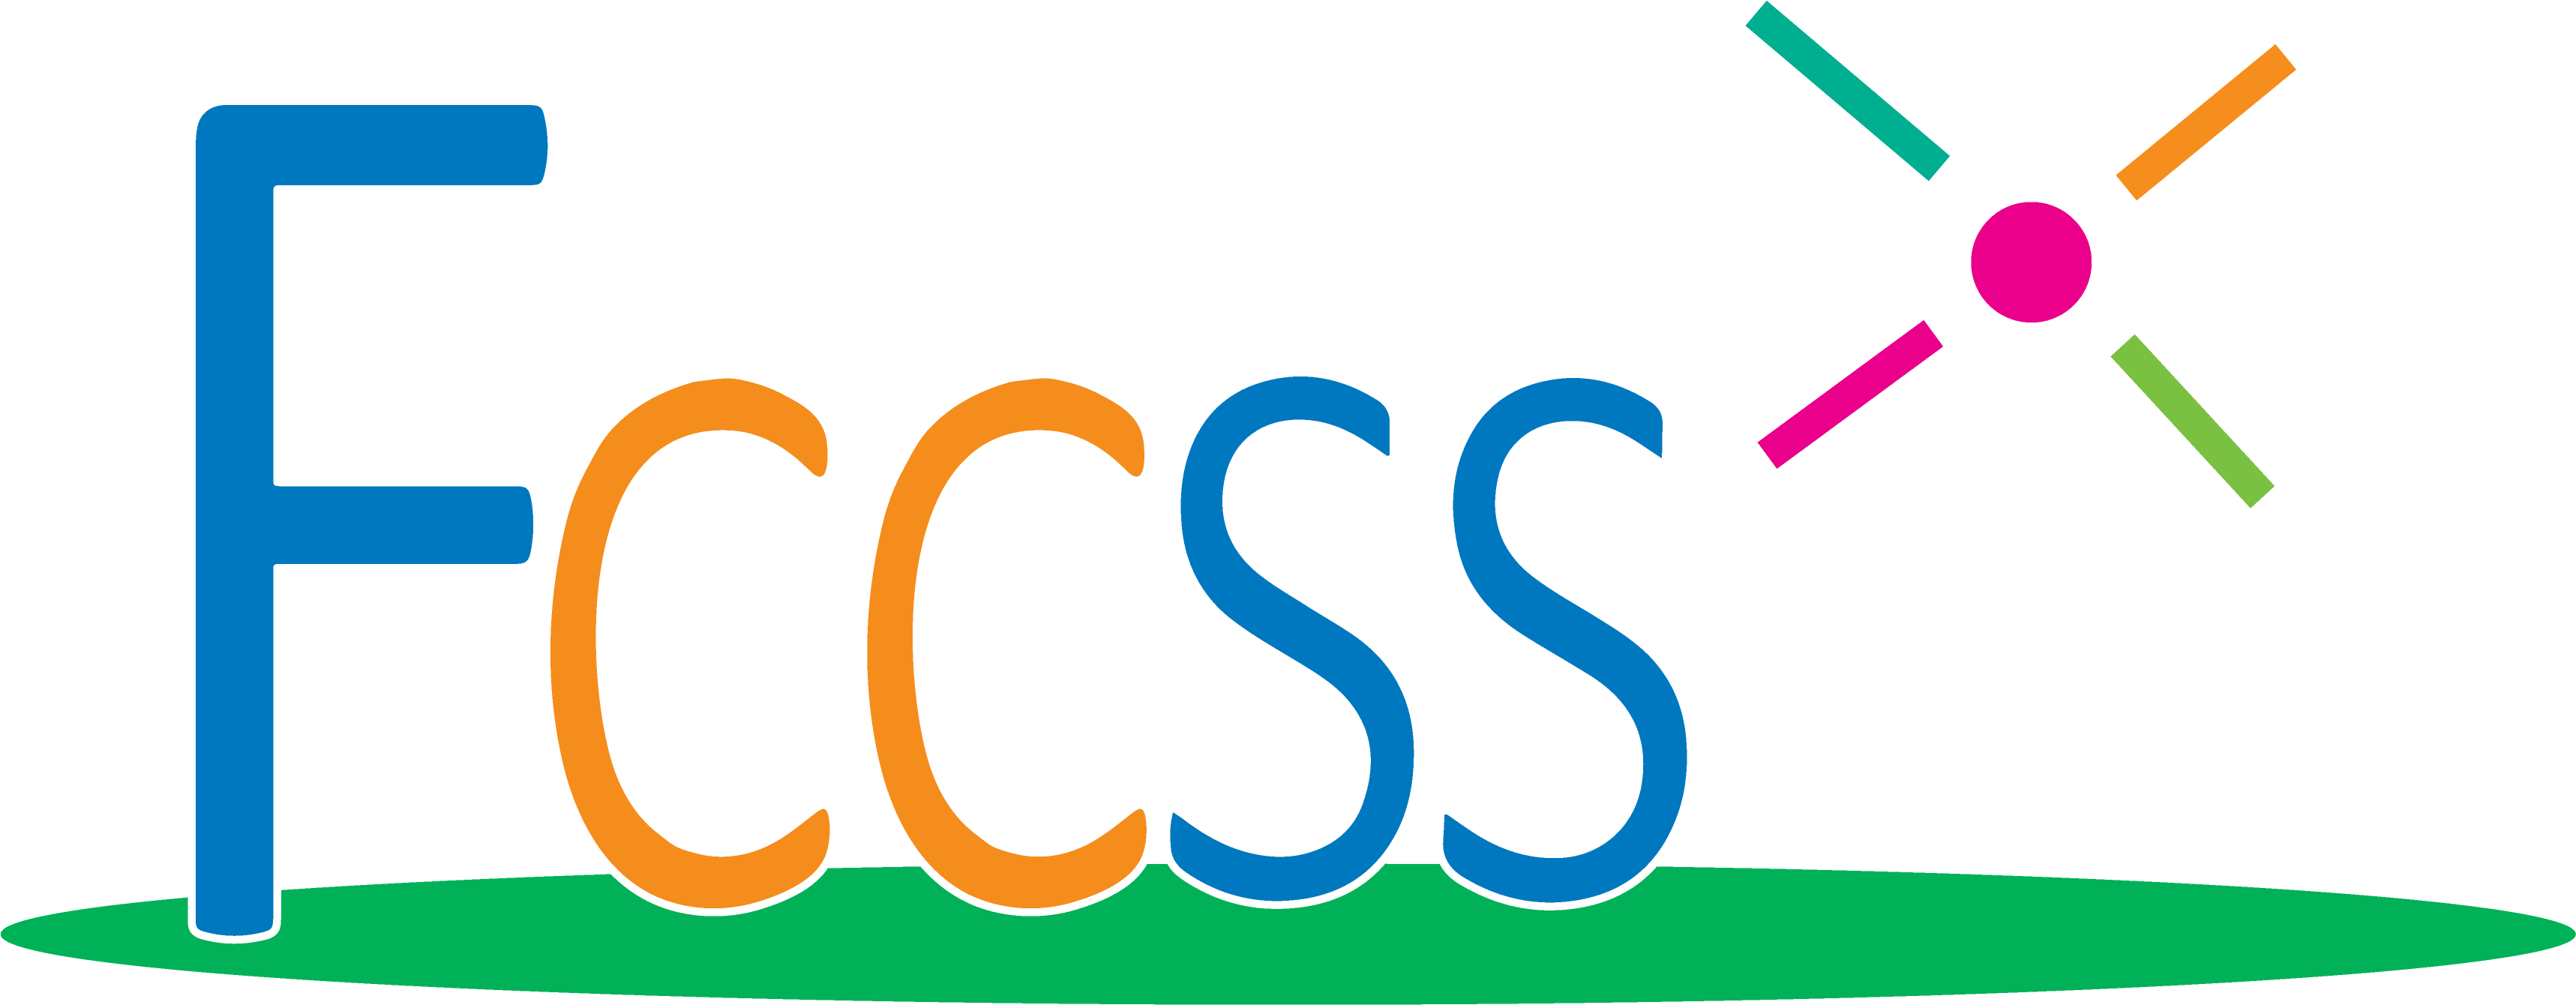 Fccss - First Choice Community Support Services Ltd. (3819x1729)